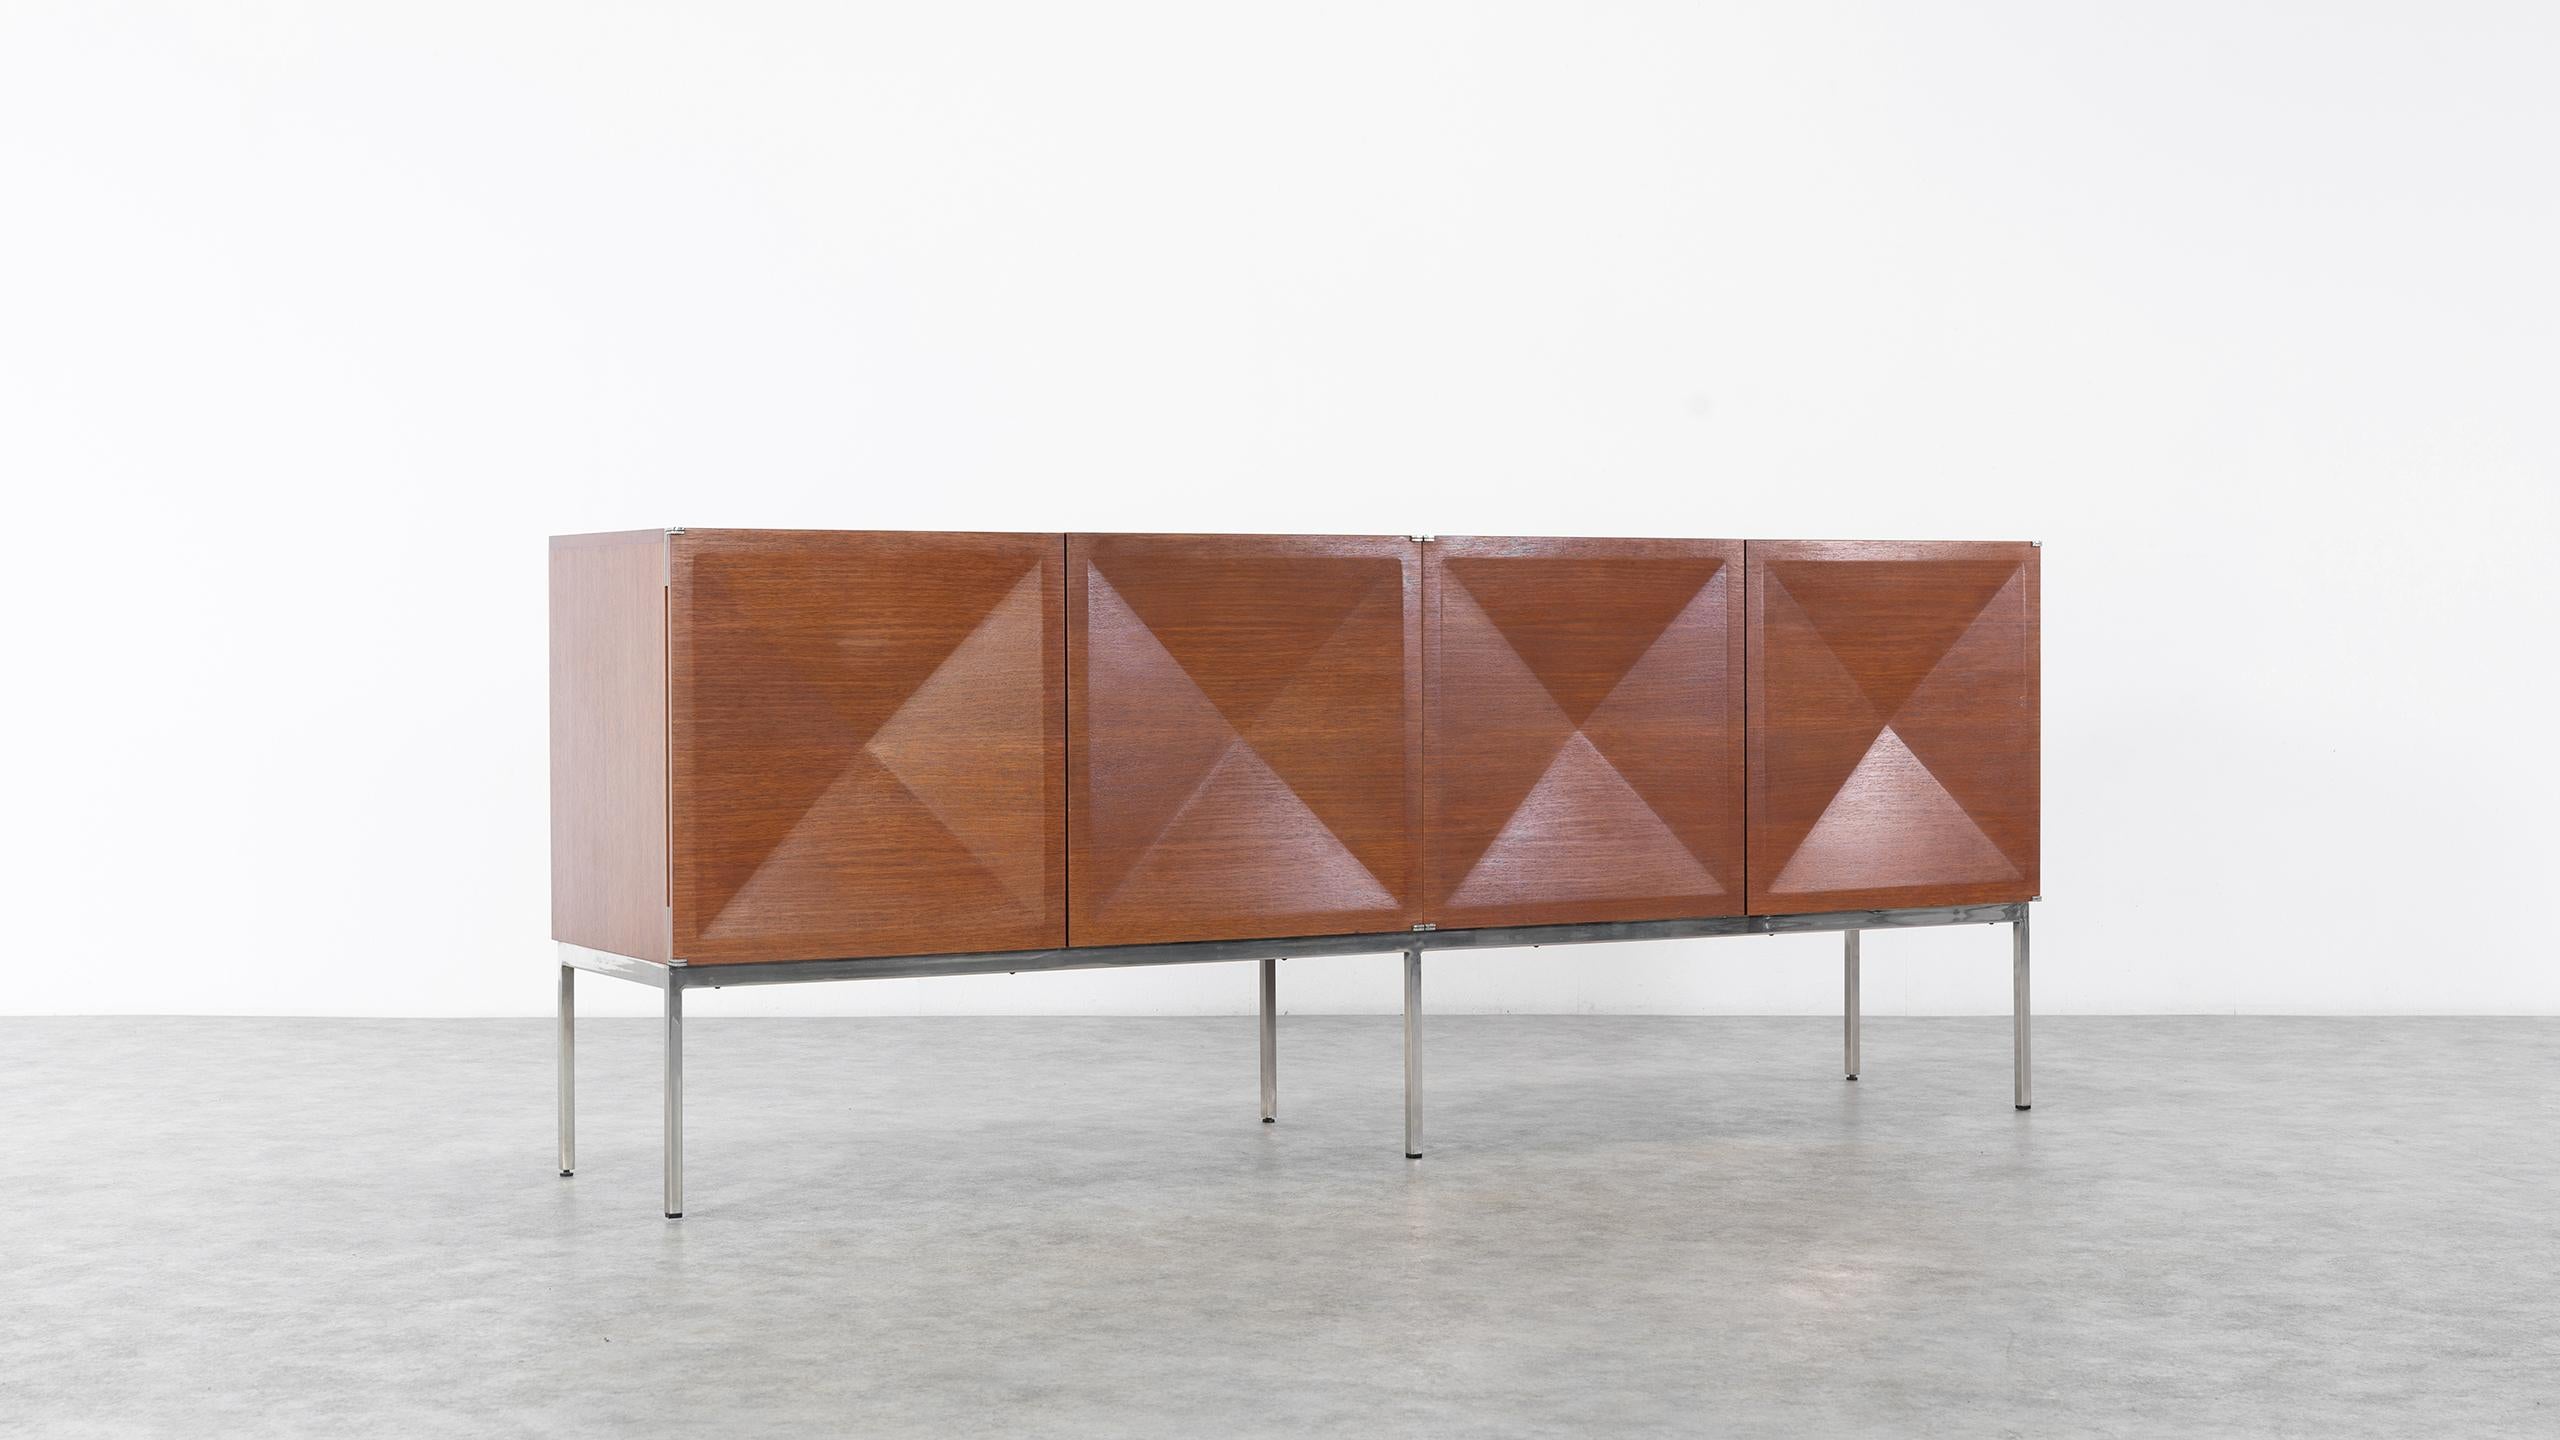 Sideboard with diamond shaped doors (Pointe de Diamant) designed by Antoine Philippon and Jacqueline Lecoq. 
Manufactured by Behr, Germany in 1962.

(Original EWB, Behr stamp on the backside, see photos)

Sideboard with four diamond shaped doors